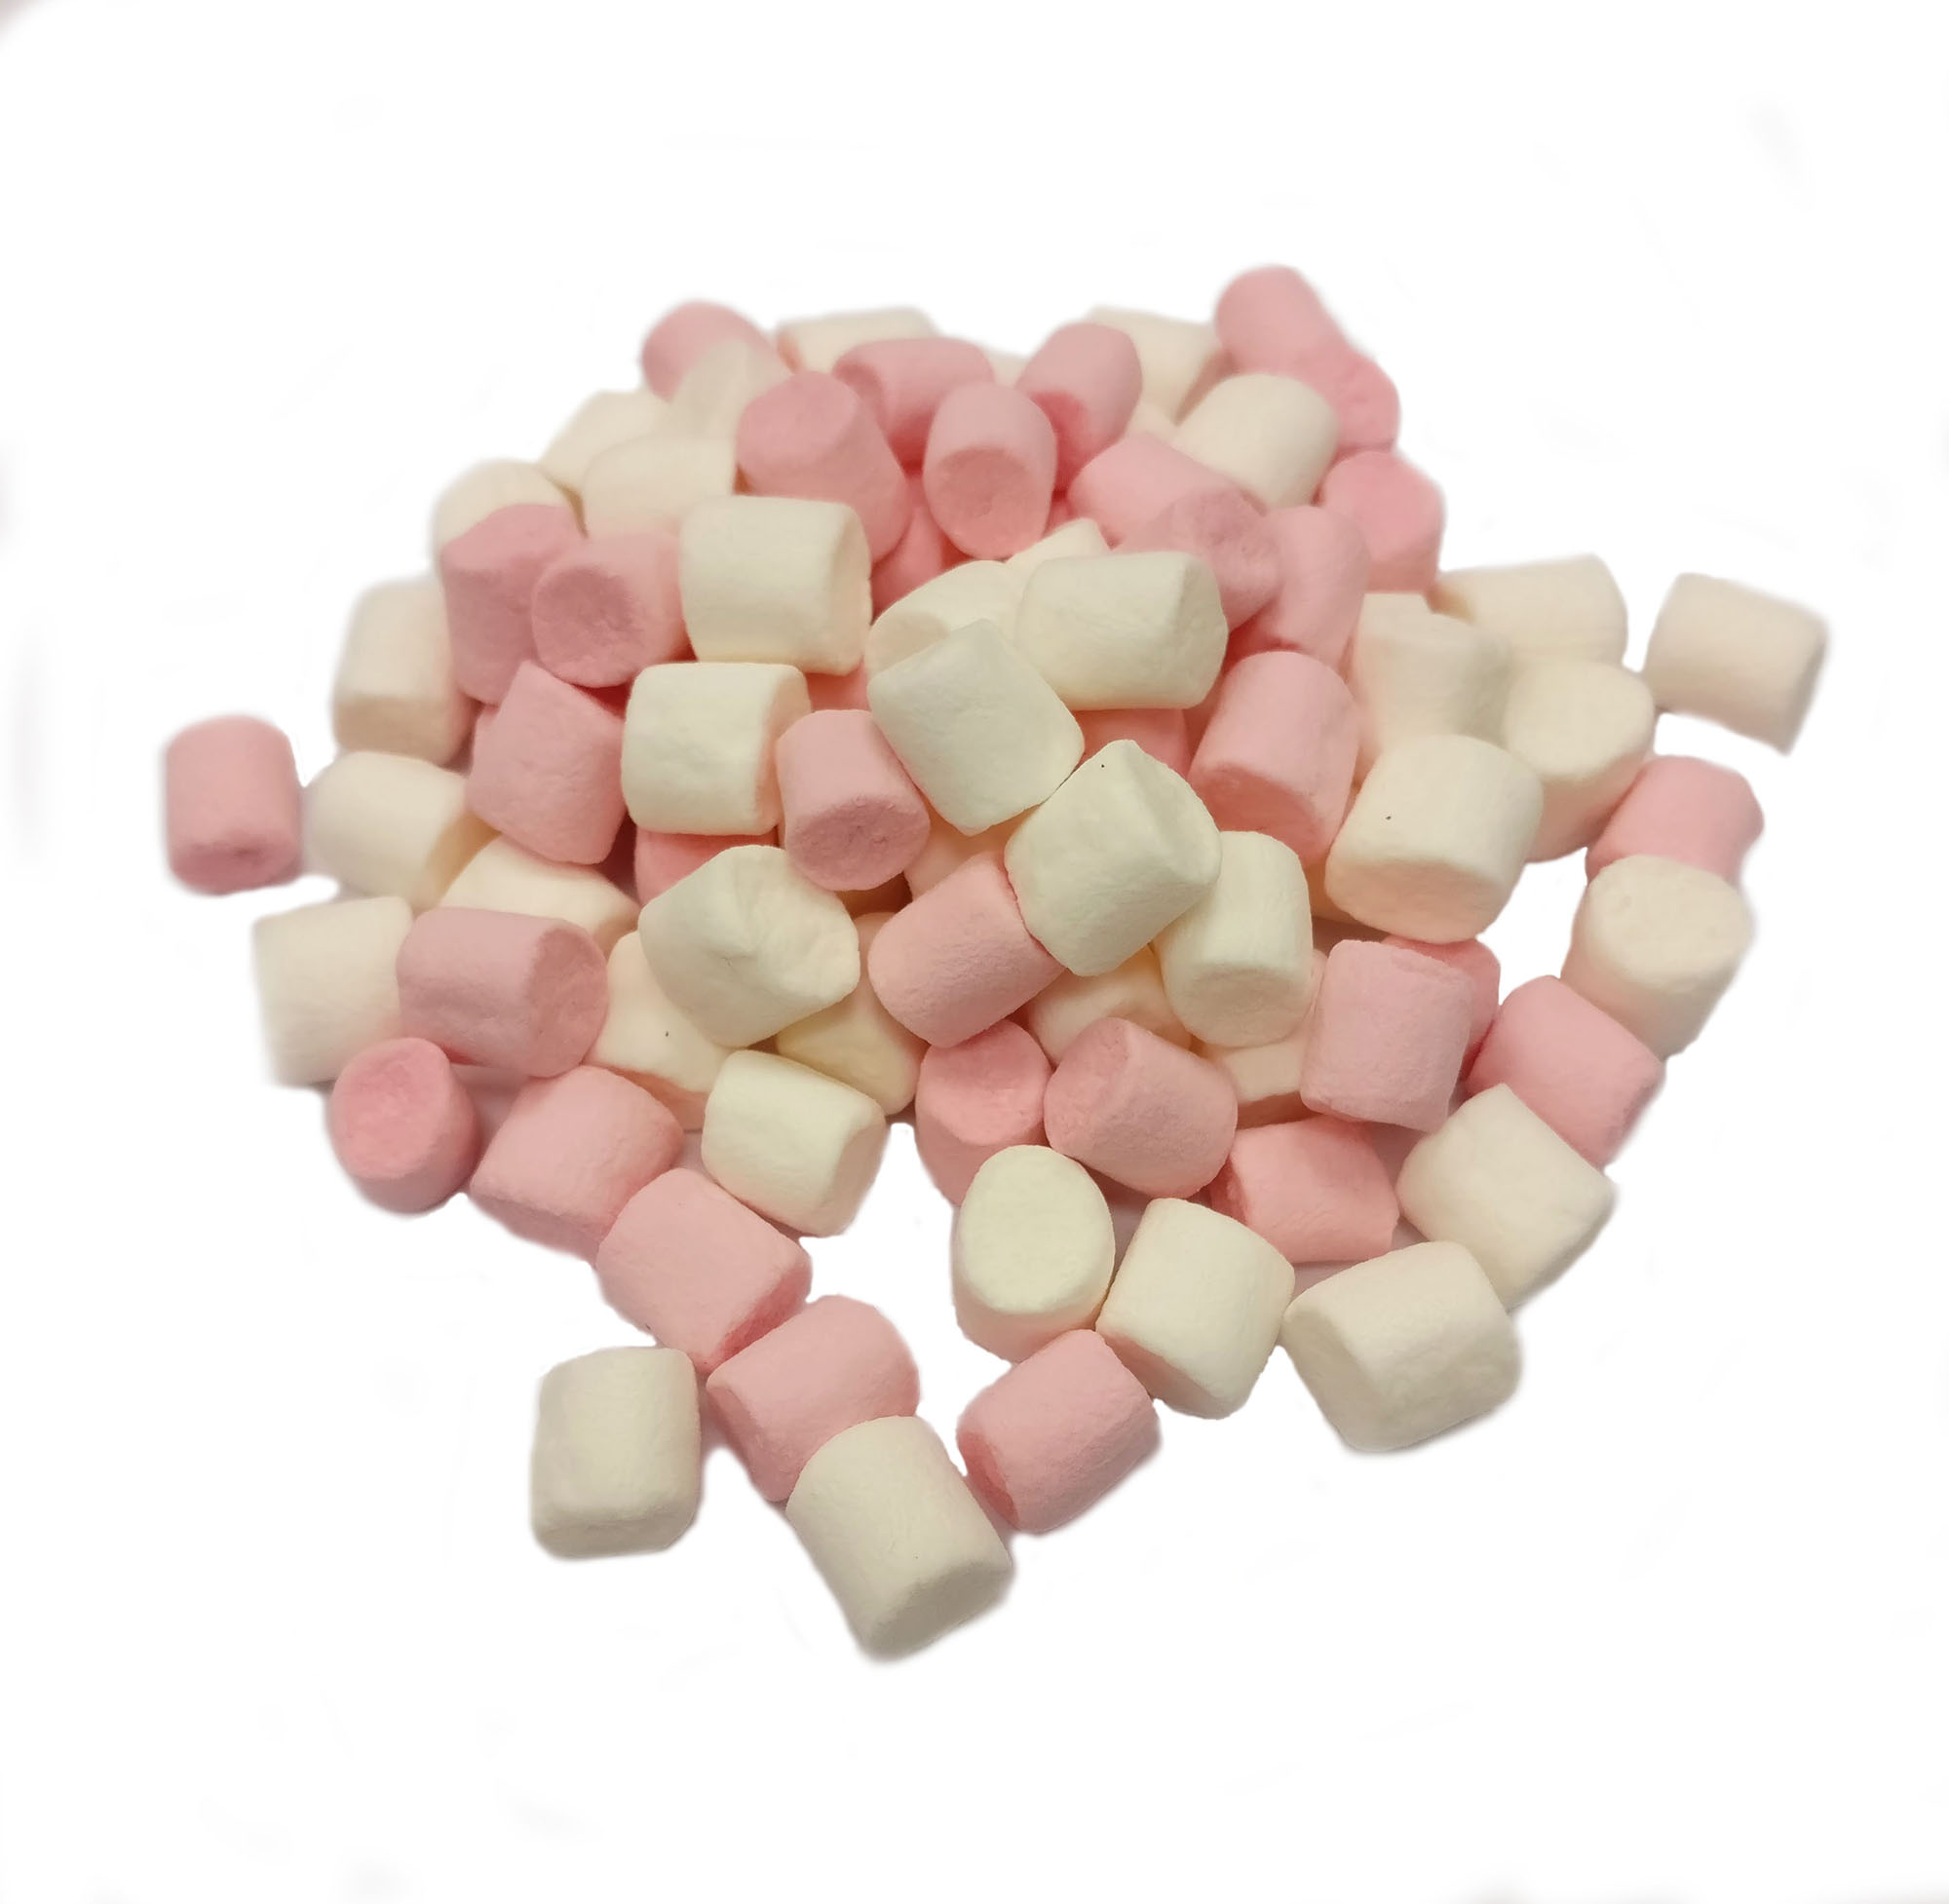 Marshmallow Products